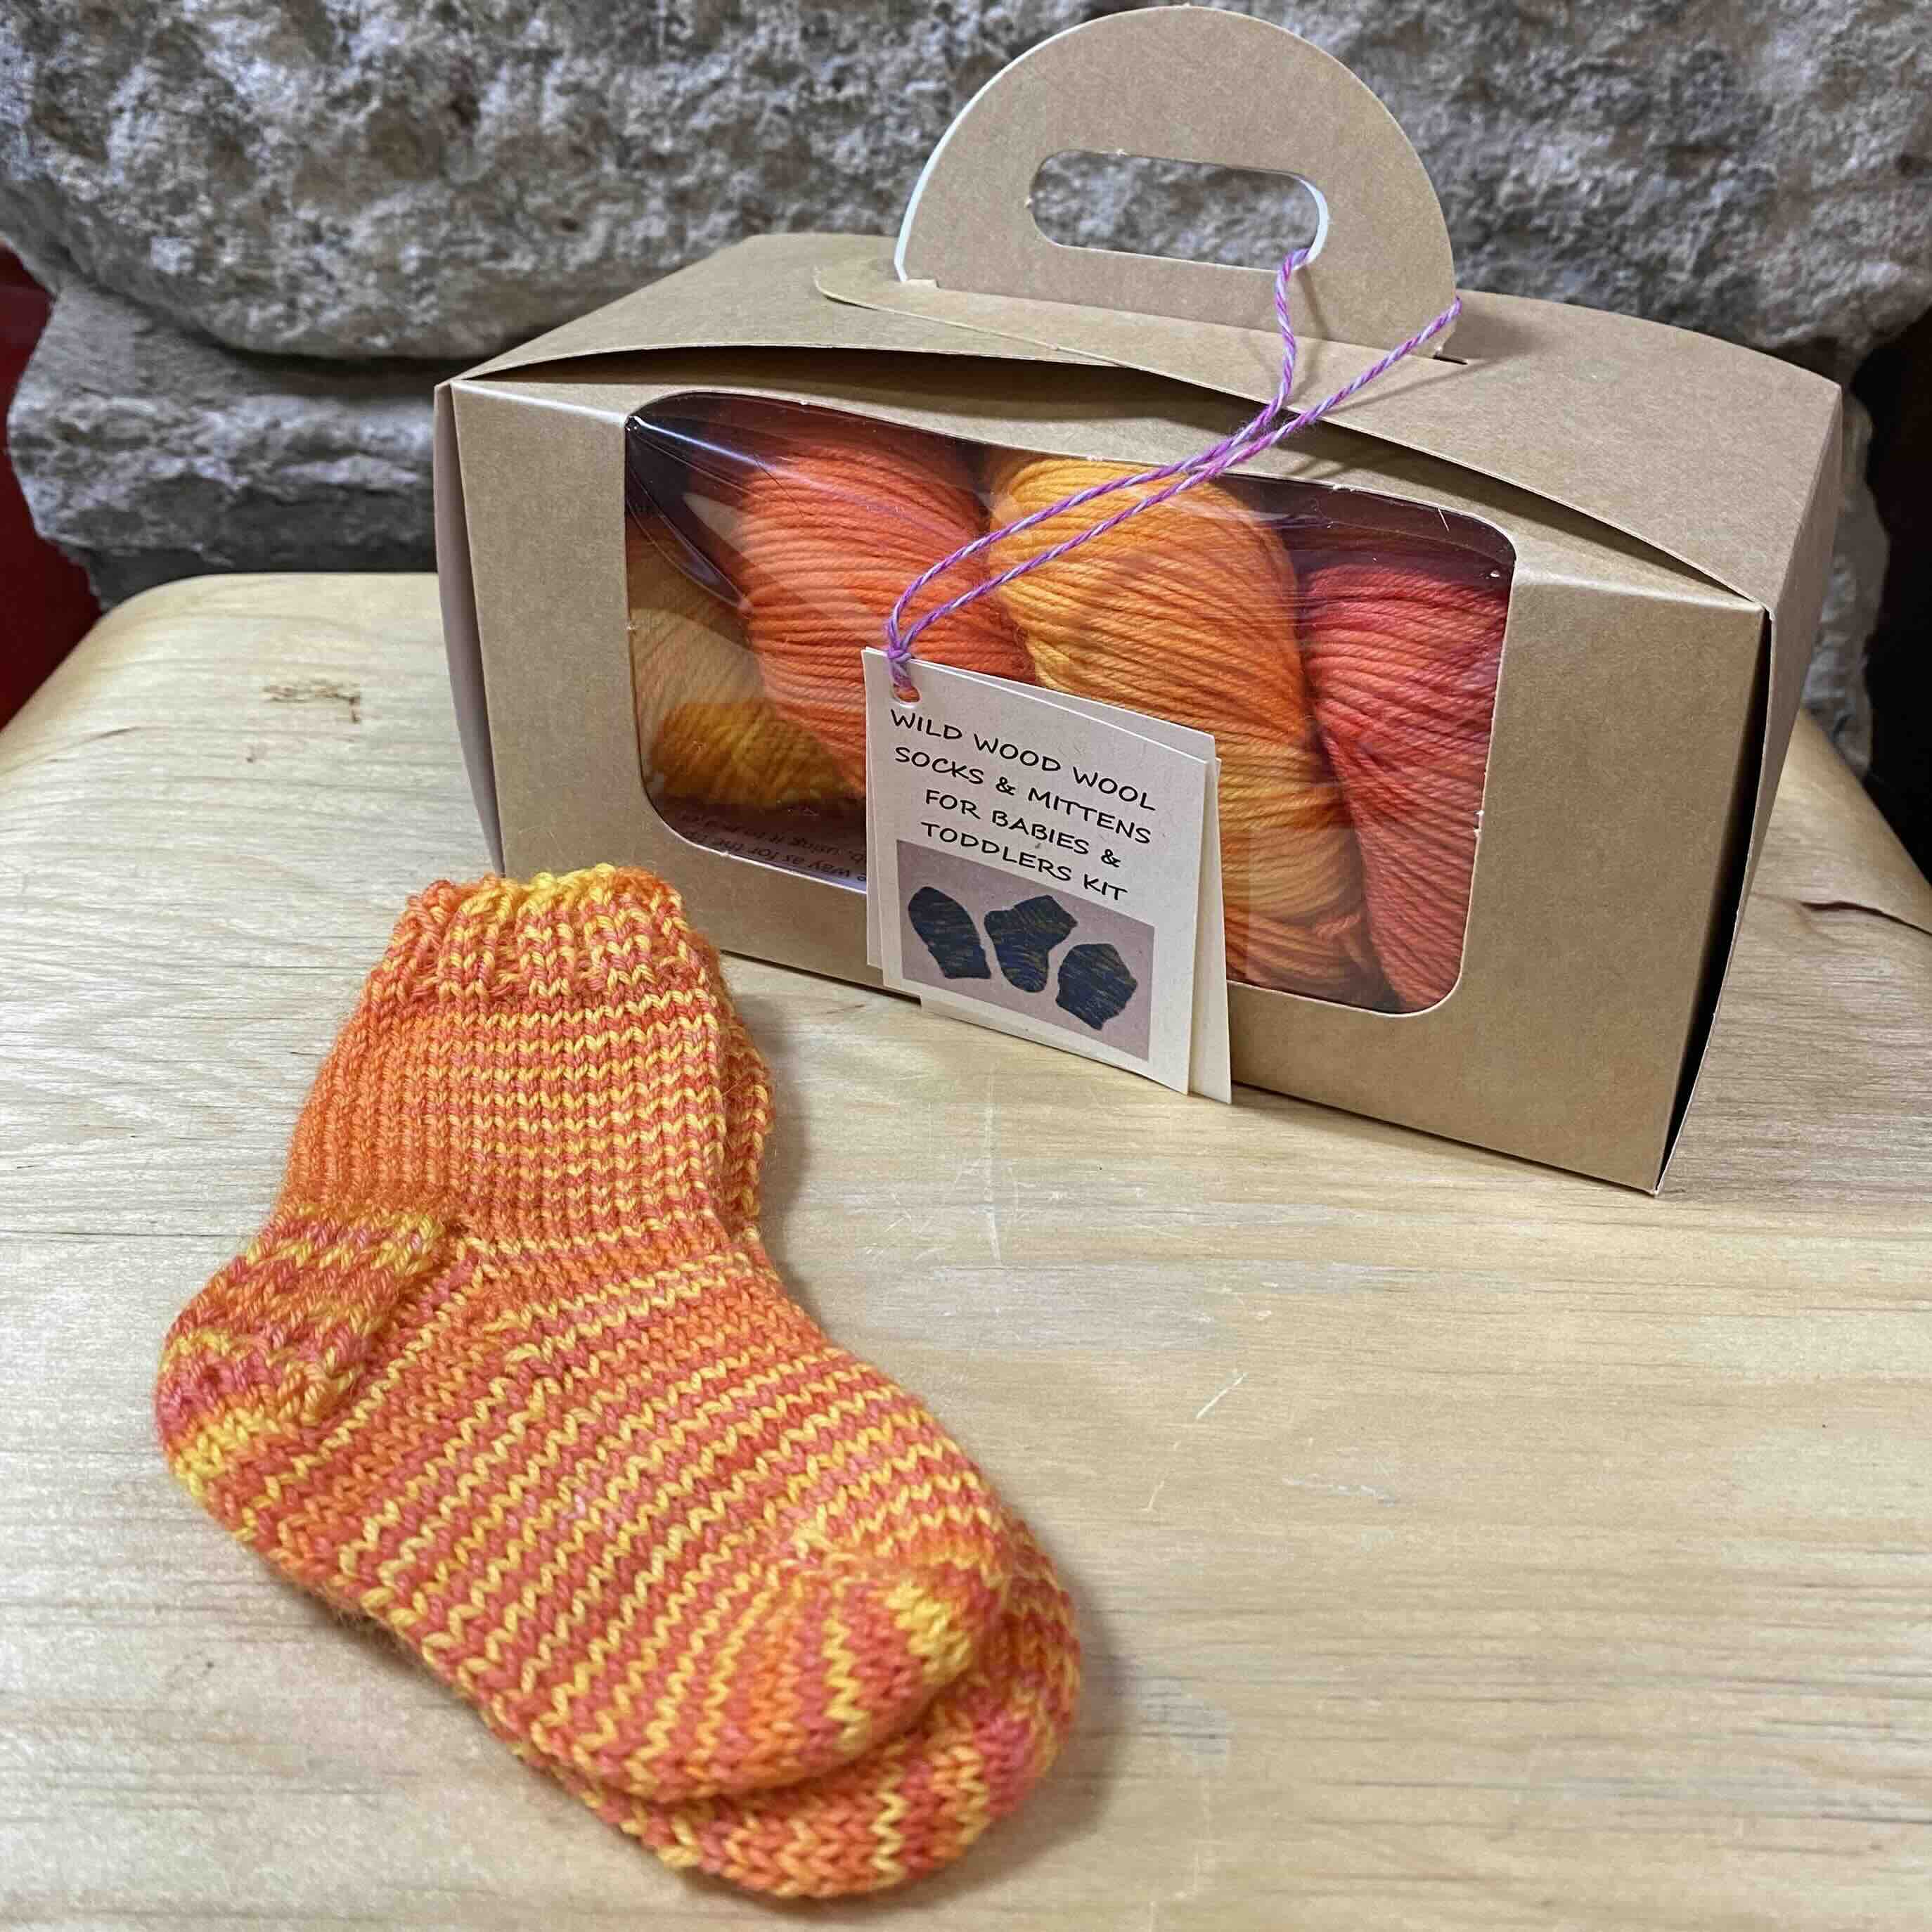 Socks & Mittens for Babies and Toddlers, Knitting Kit in FA111